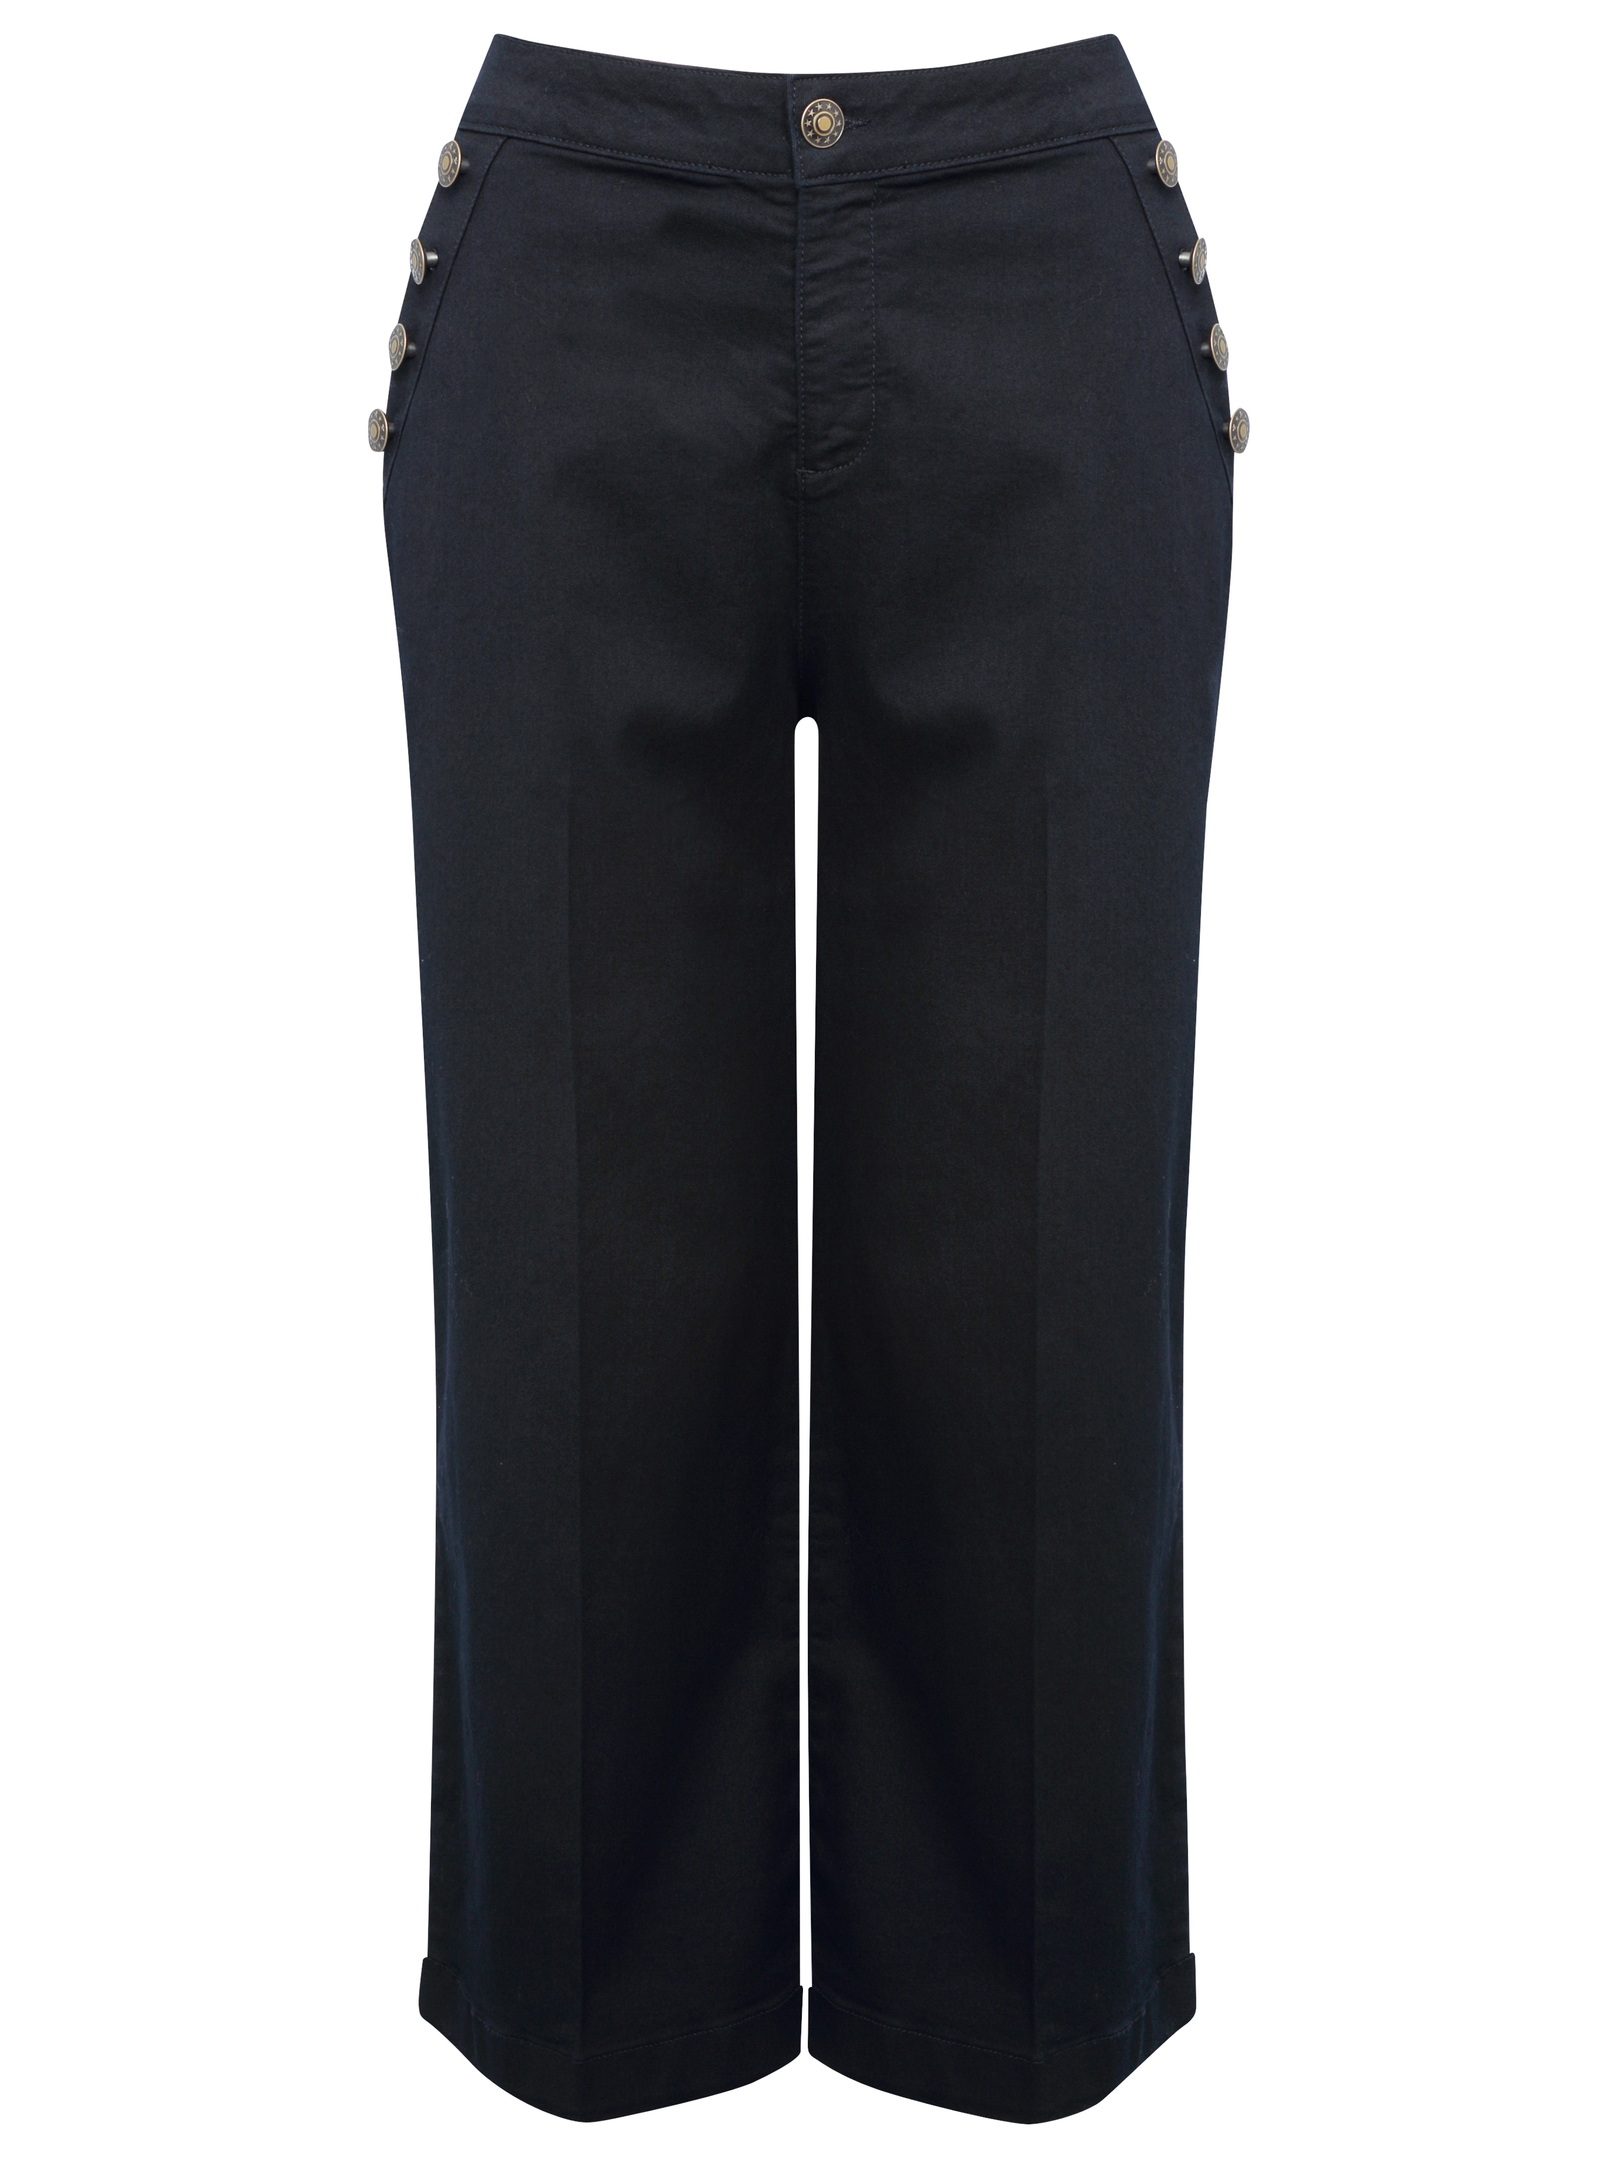 Trousers, £28, M and Co